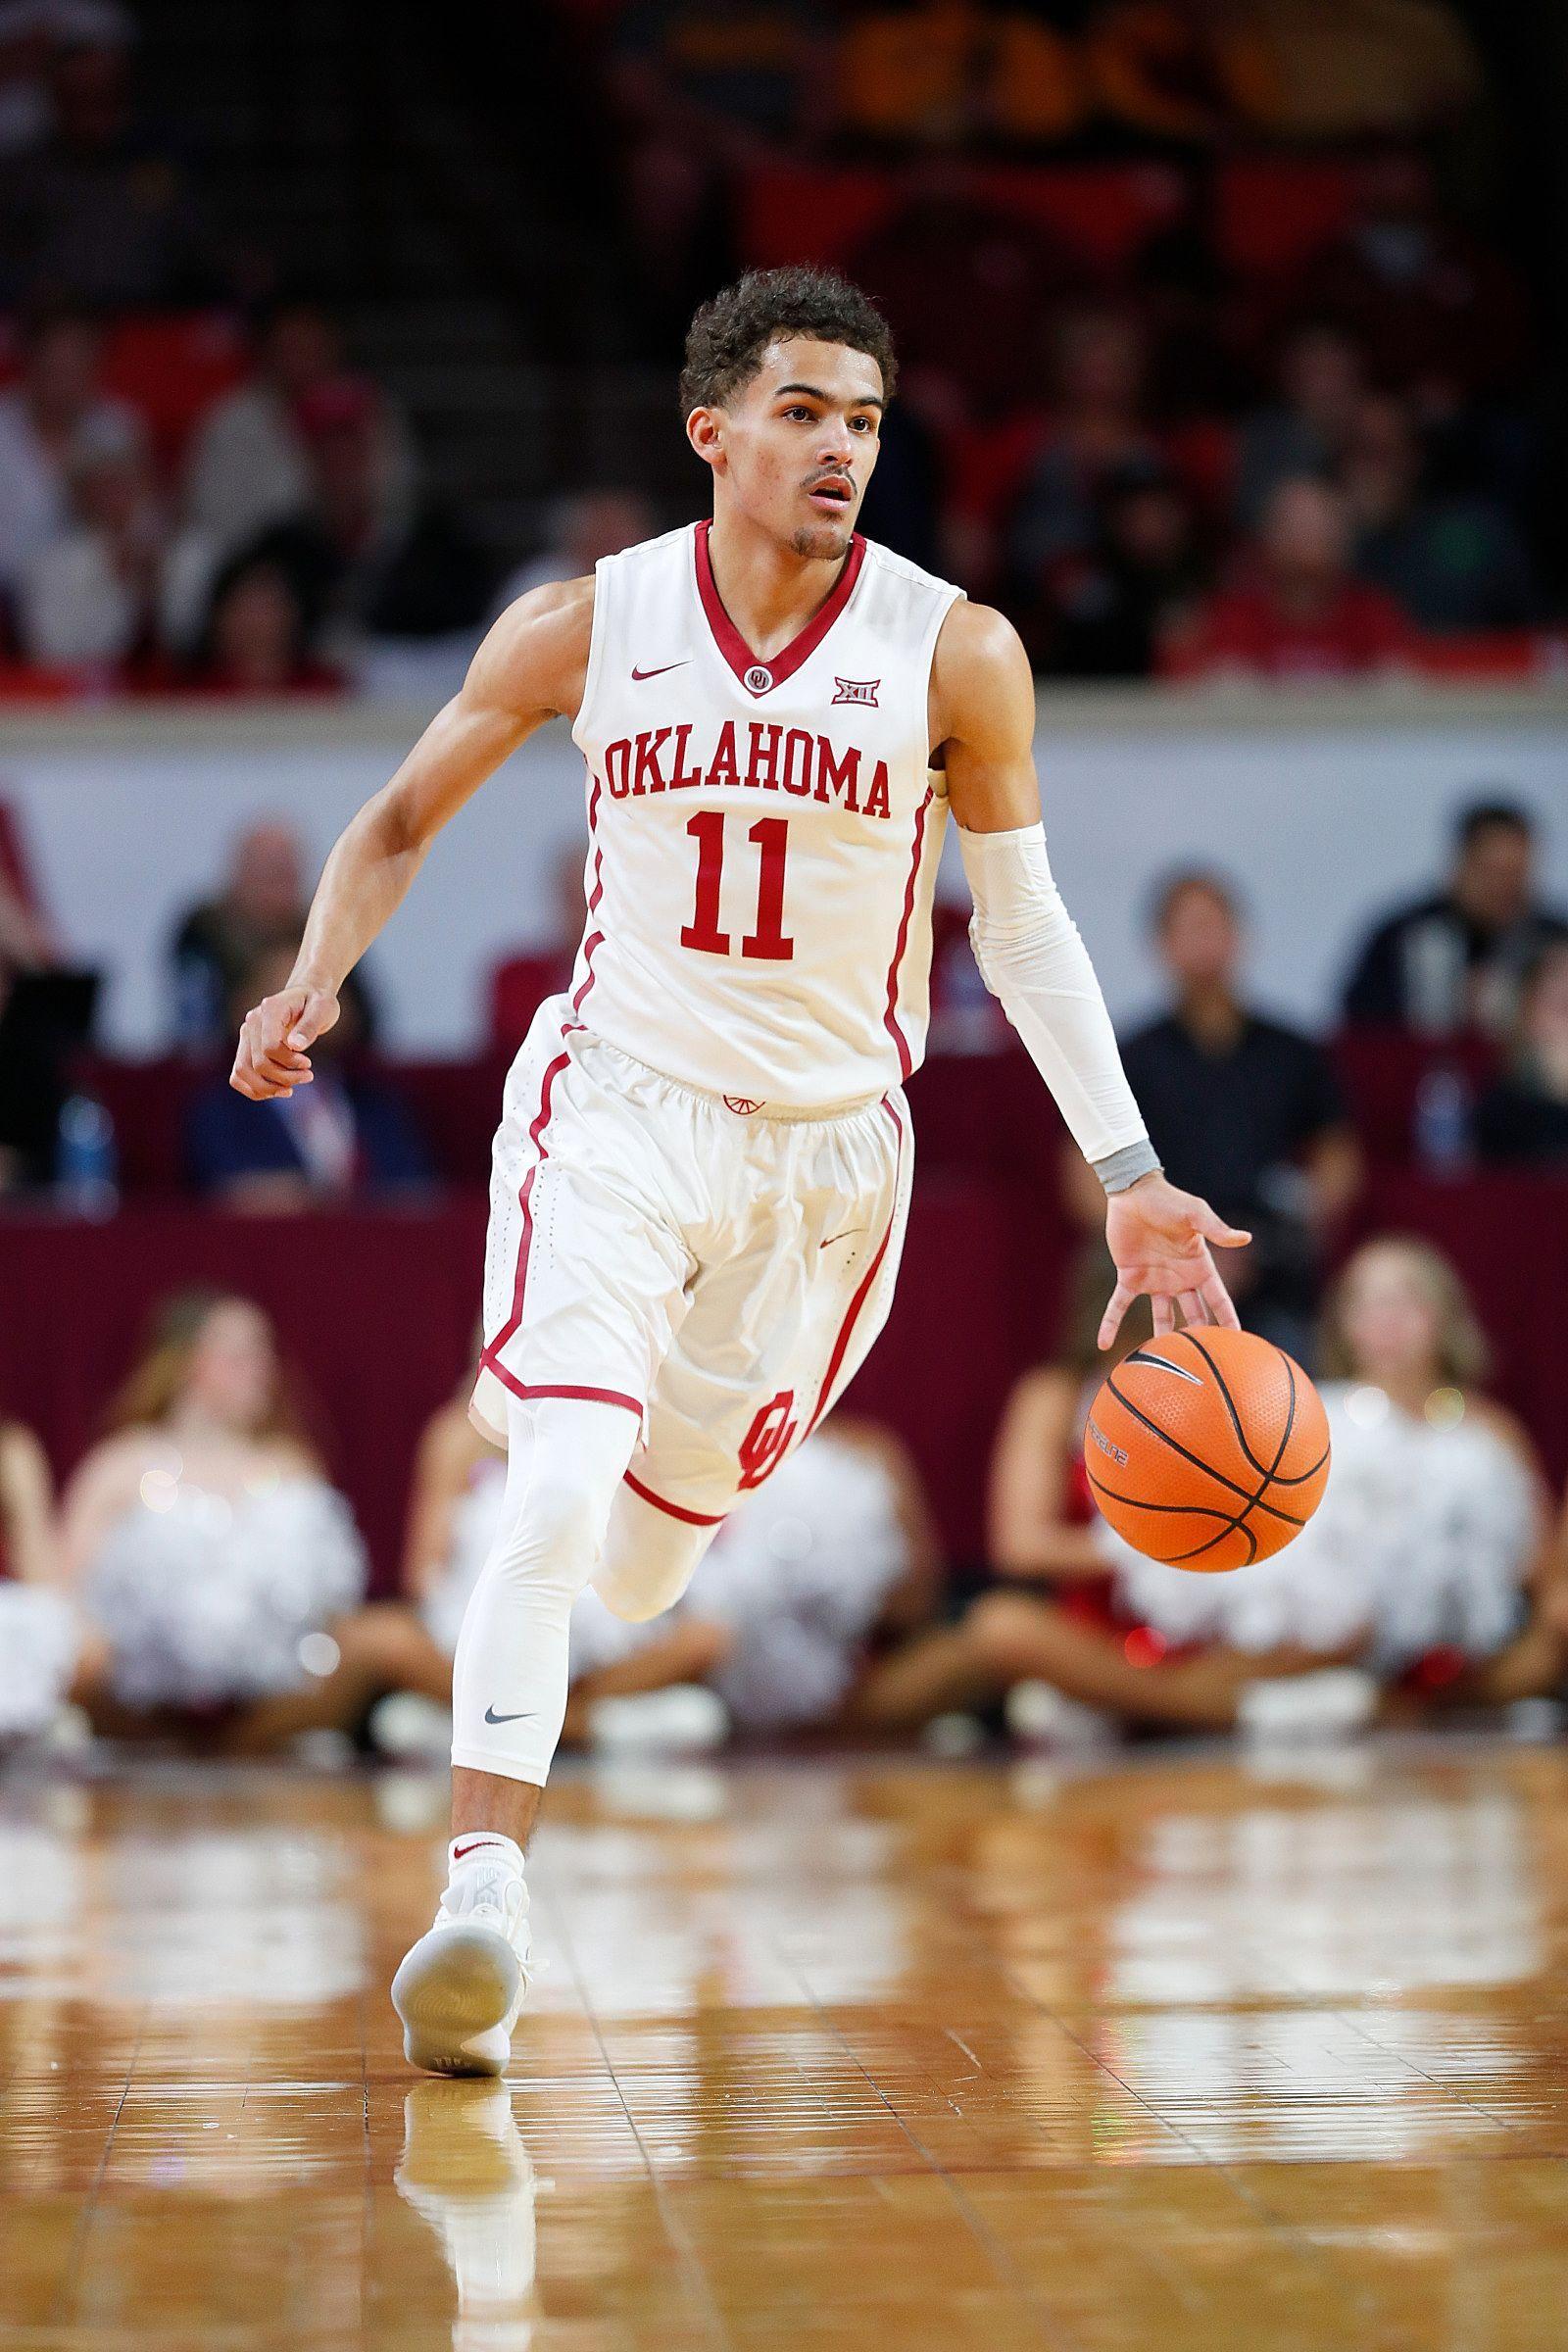 NBA Draft: Hawks Should Select Trae Young 3rd Overall